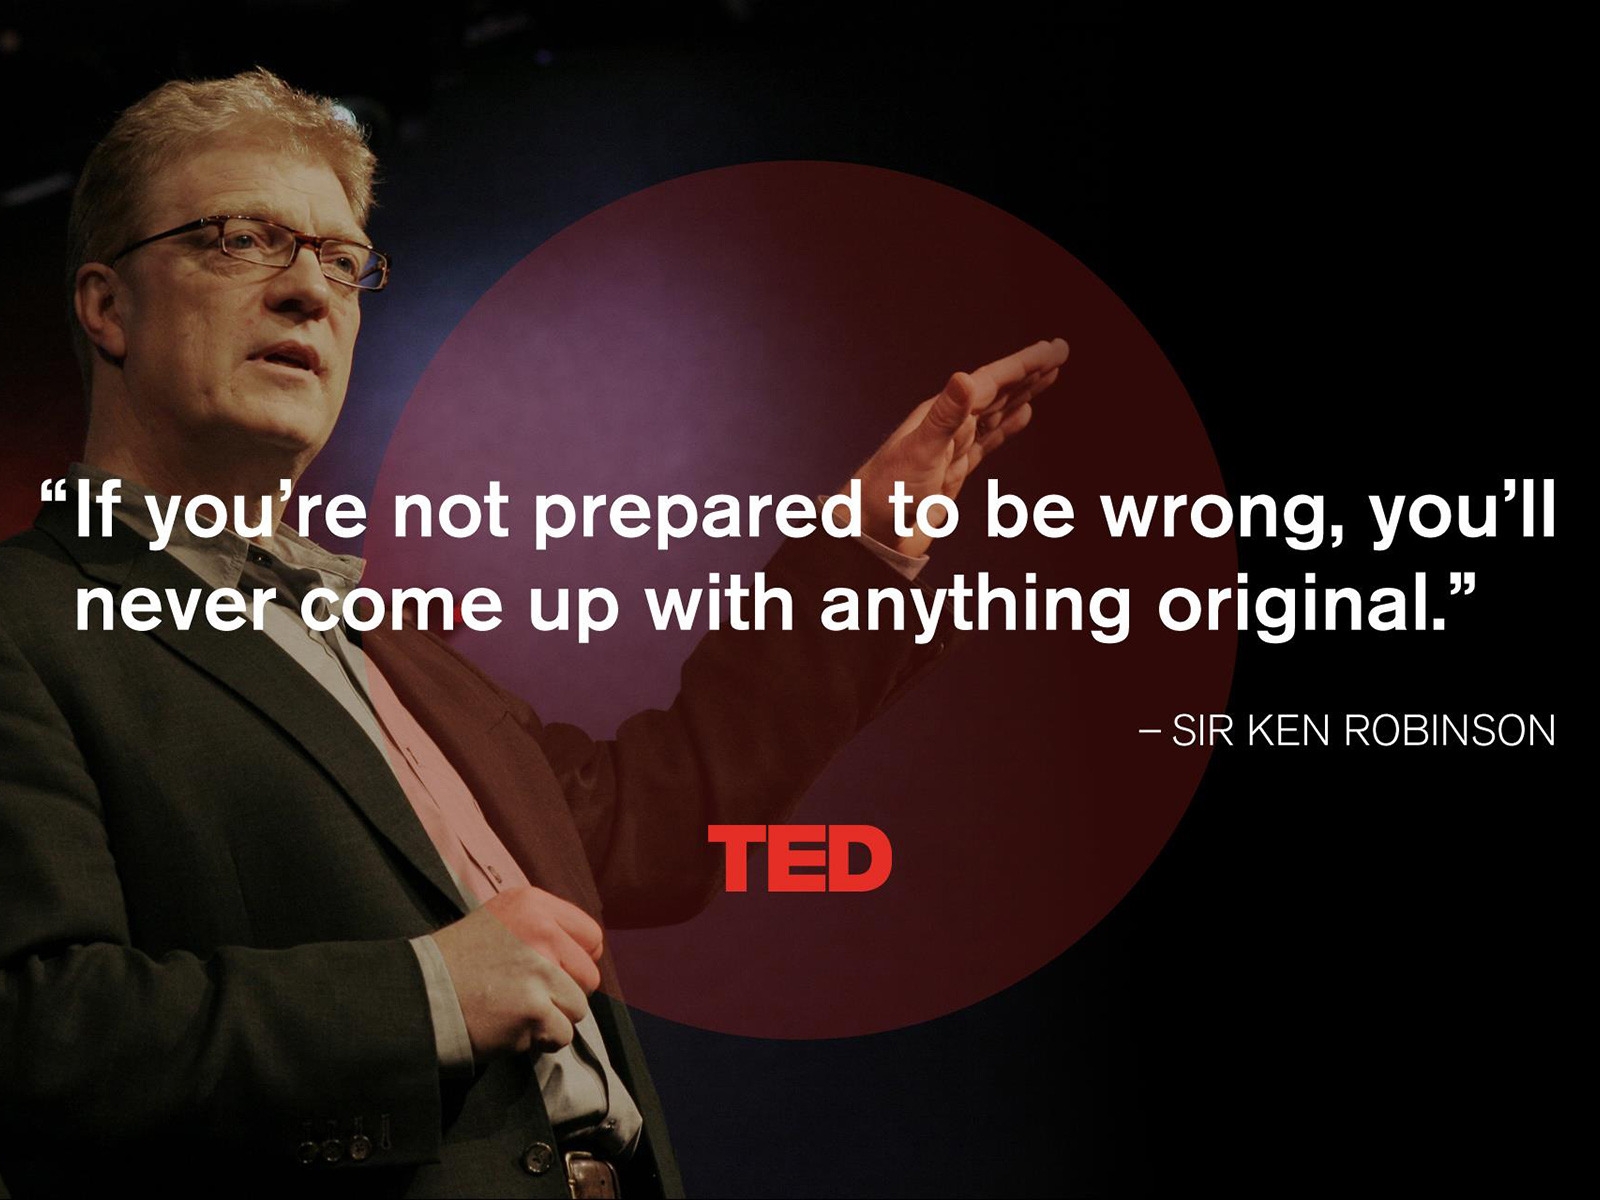 Sir Ken Robinson Quote for 1600 x 1200 resolution